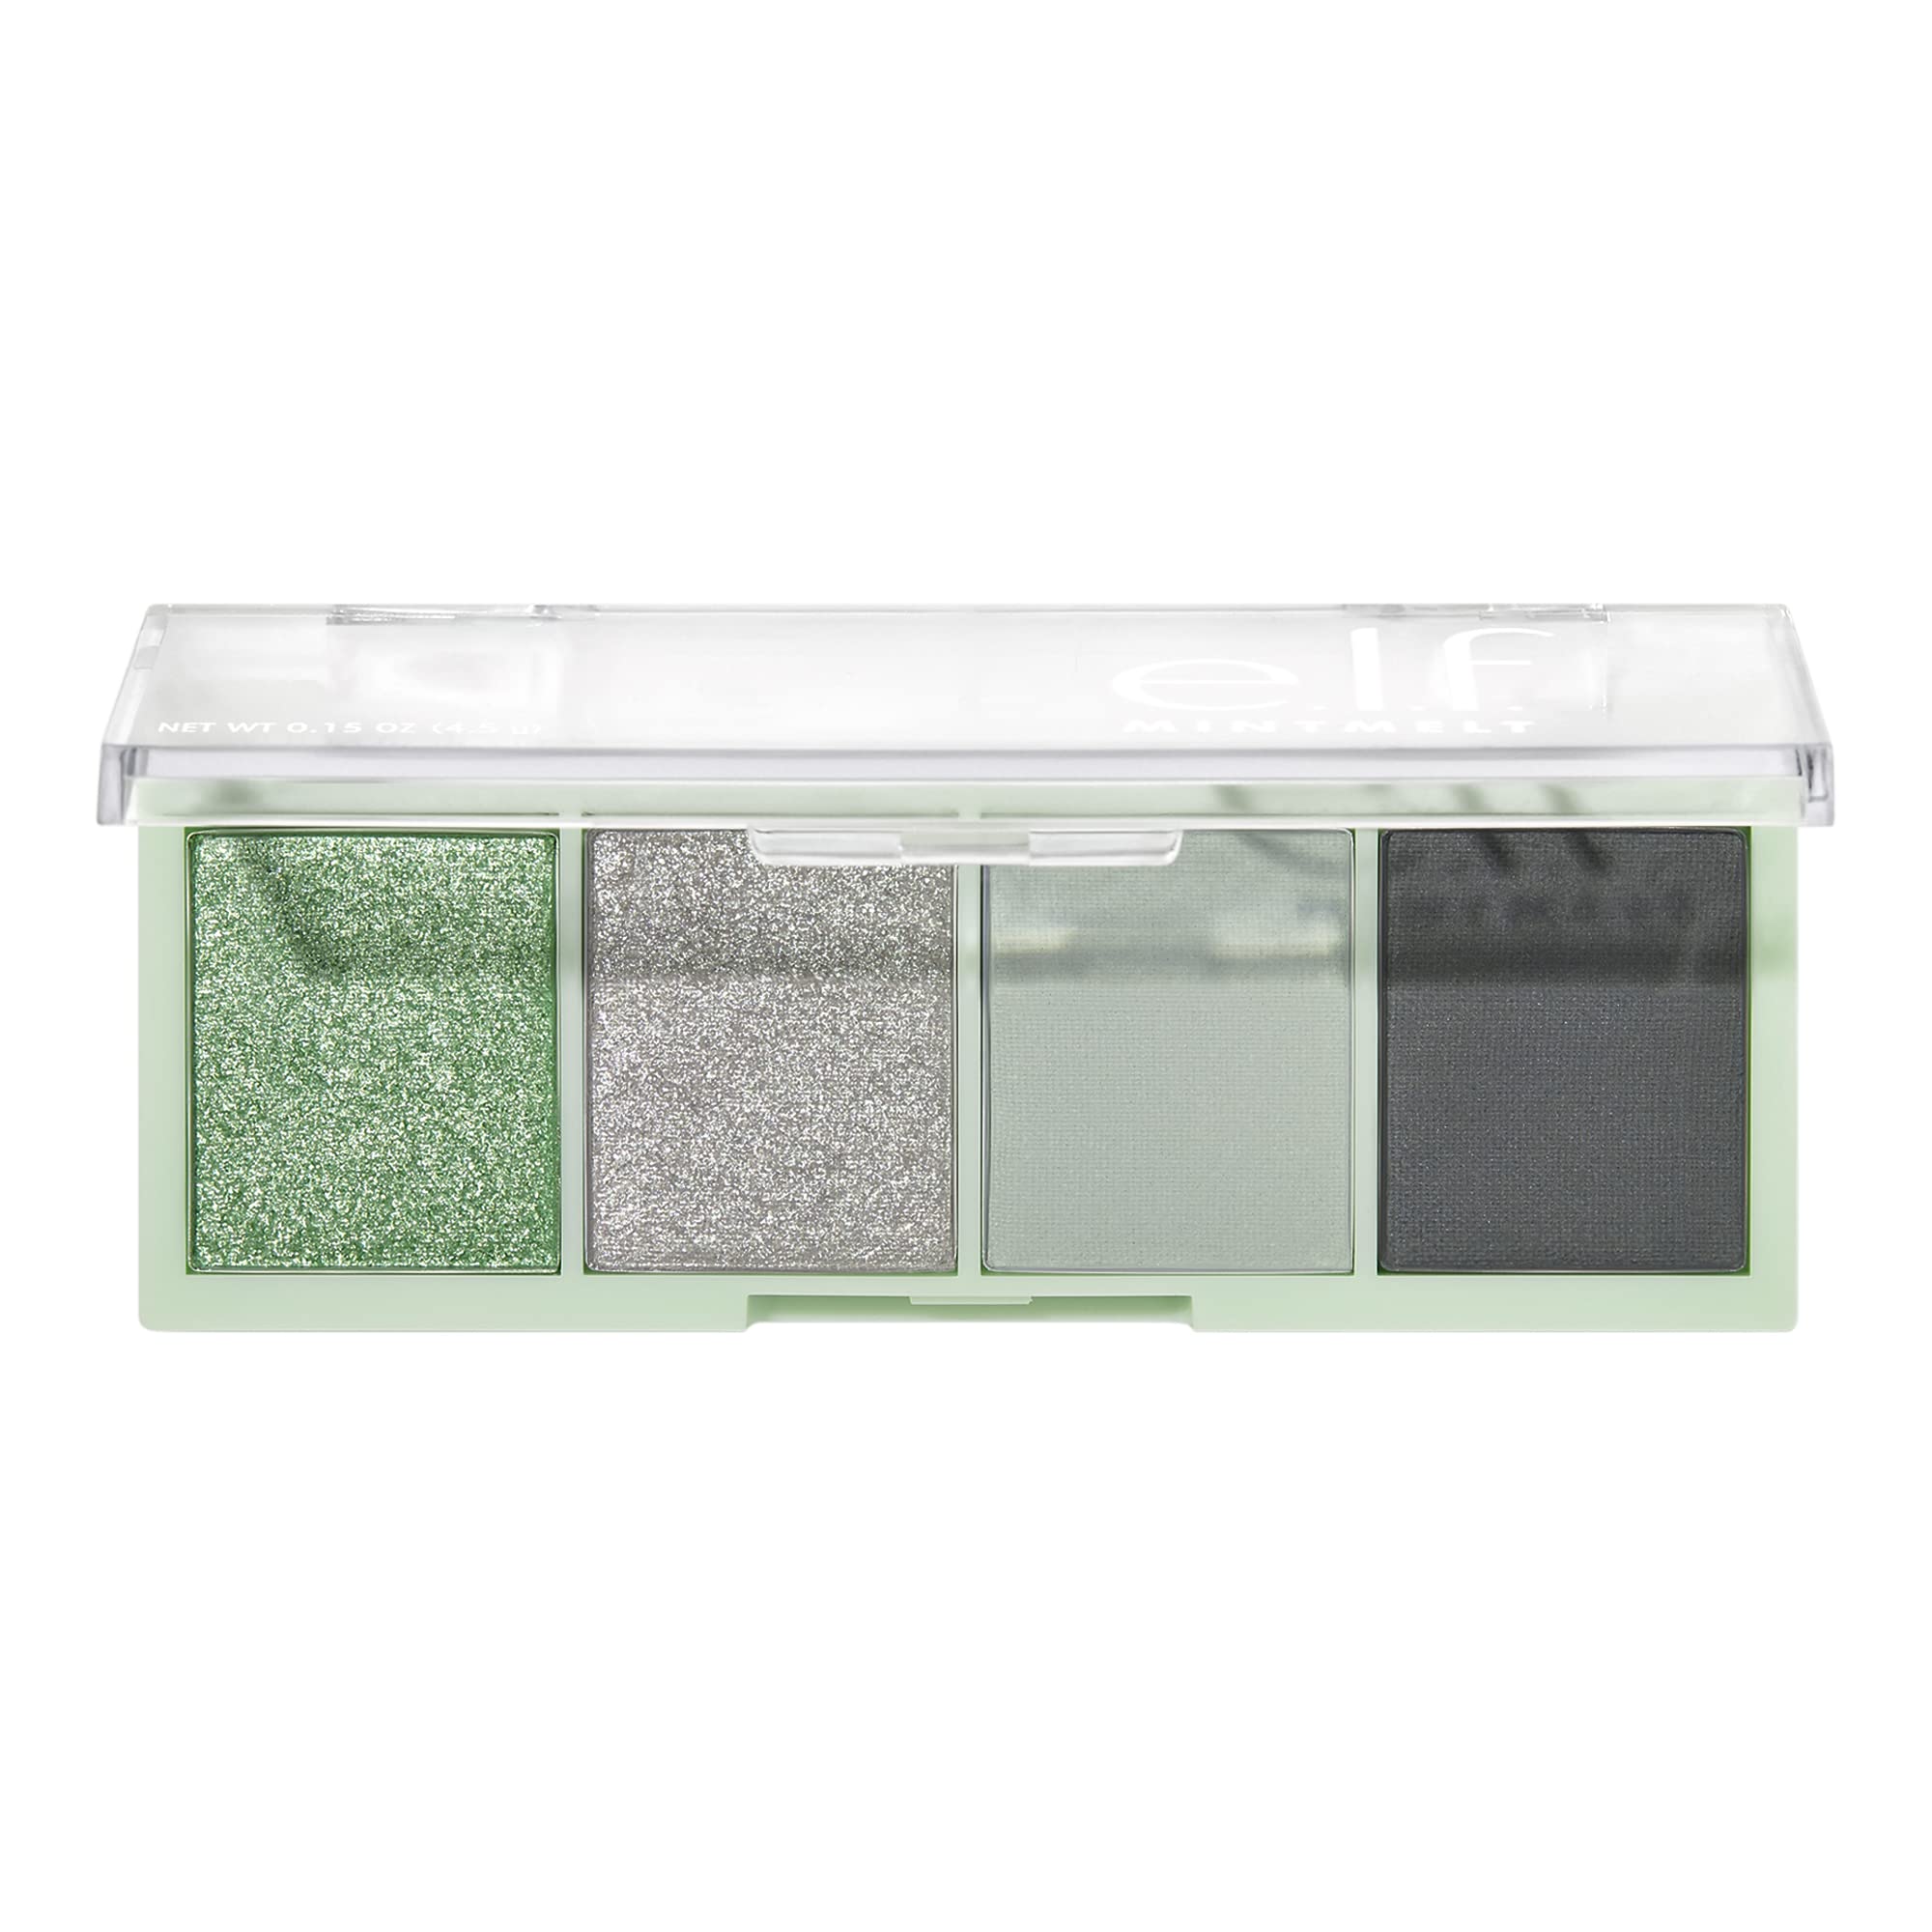 e.l.f. Mini Melt Eyeshadow, Pigment-packed, Eyeshadow Quad Featuring A Mix of Matte & Shimmer Shades, On-The-Go Size, Vegan & Cruelty-Free, Mint To Be